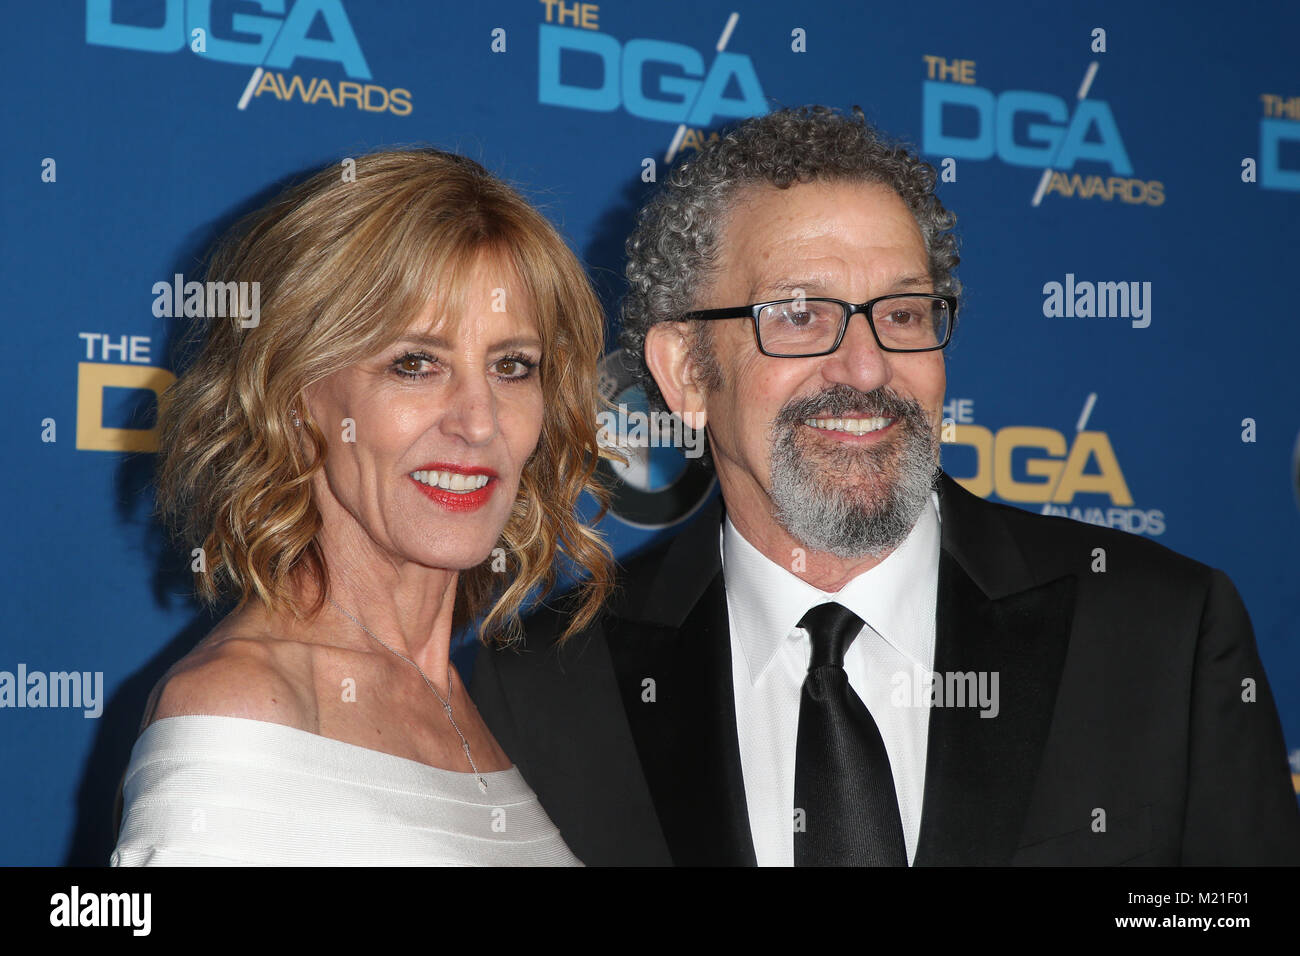 Beverly Hills, Ca. 3rd Feb, 2018. Christine Lahti and Thomas Schlamme at  the 70th Annual DGA Awards at The Beverly Hilton Hotel in Beverly Hills,  California on February 3, 2018. Credit: Faye